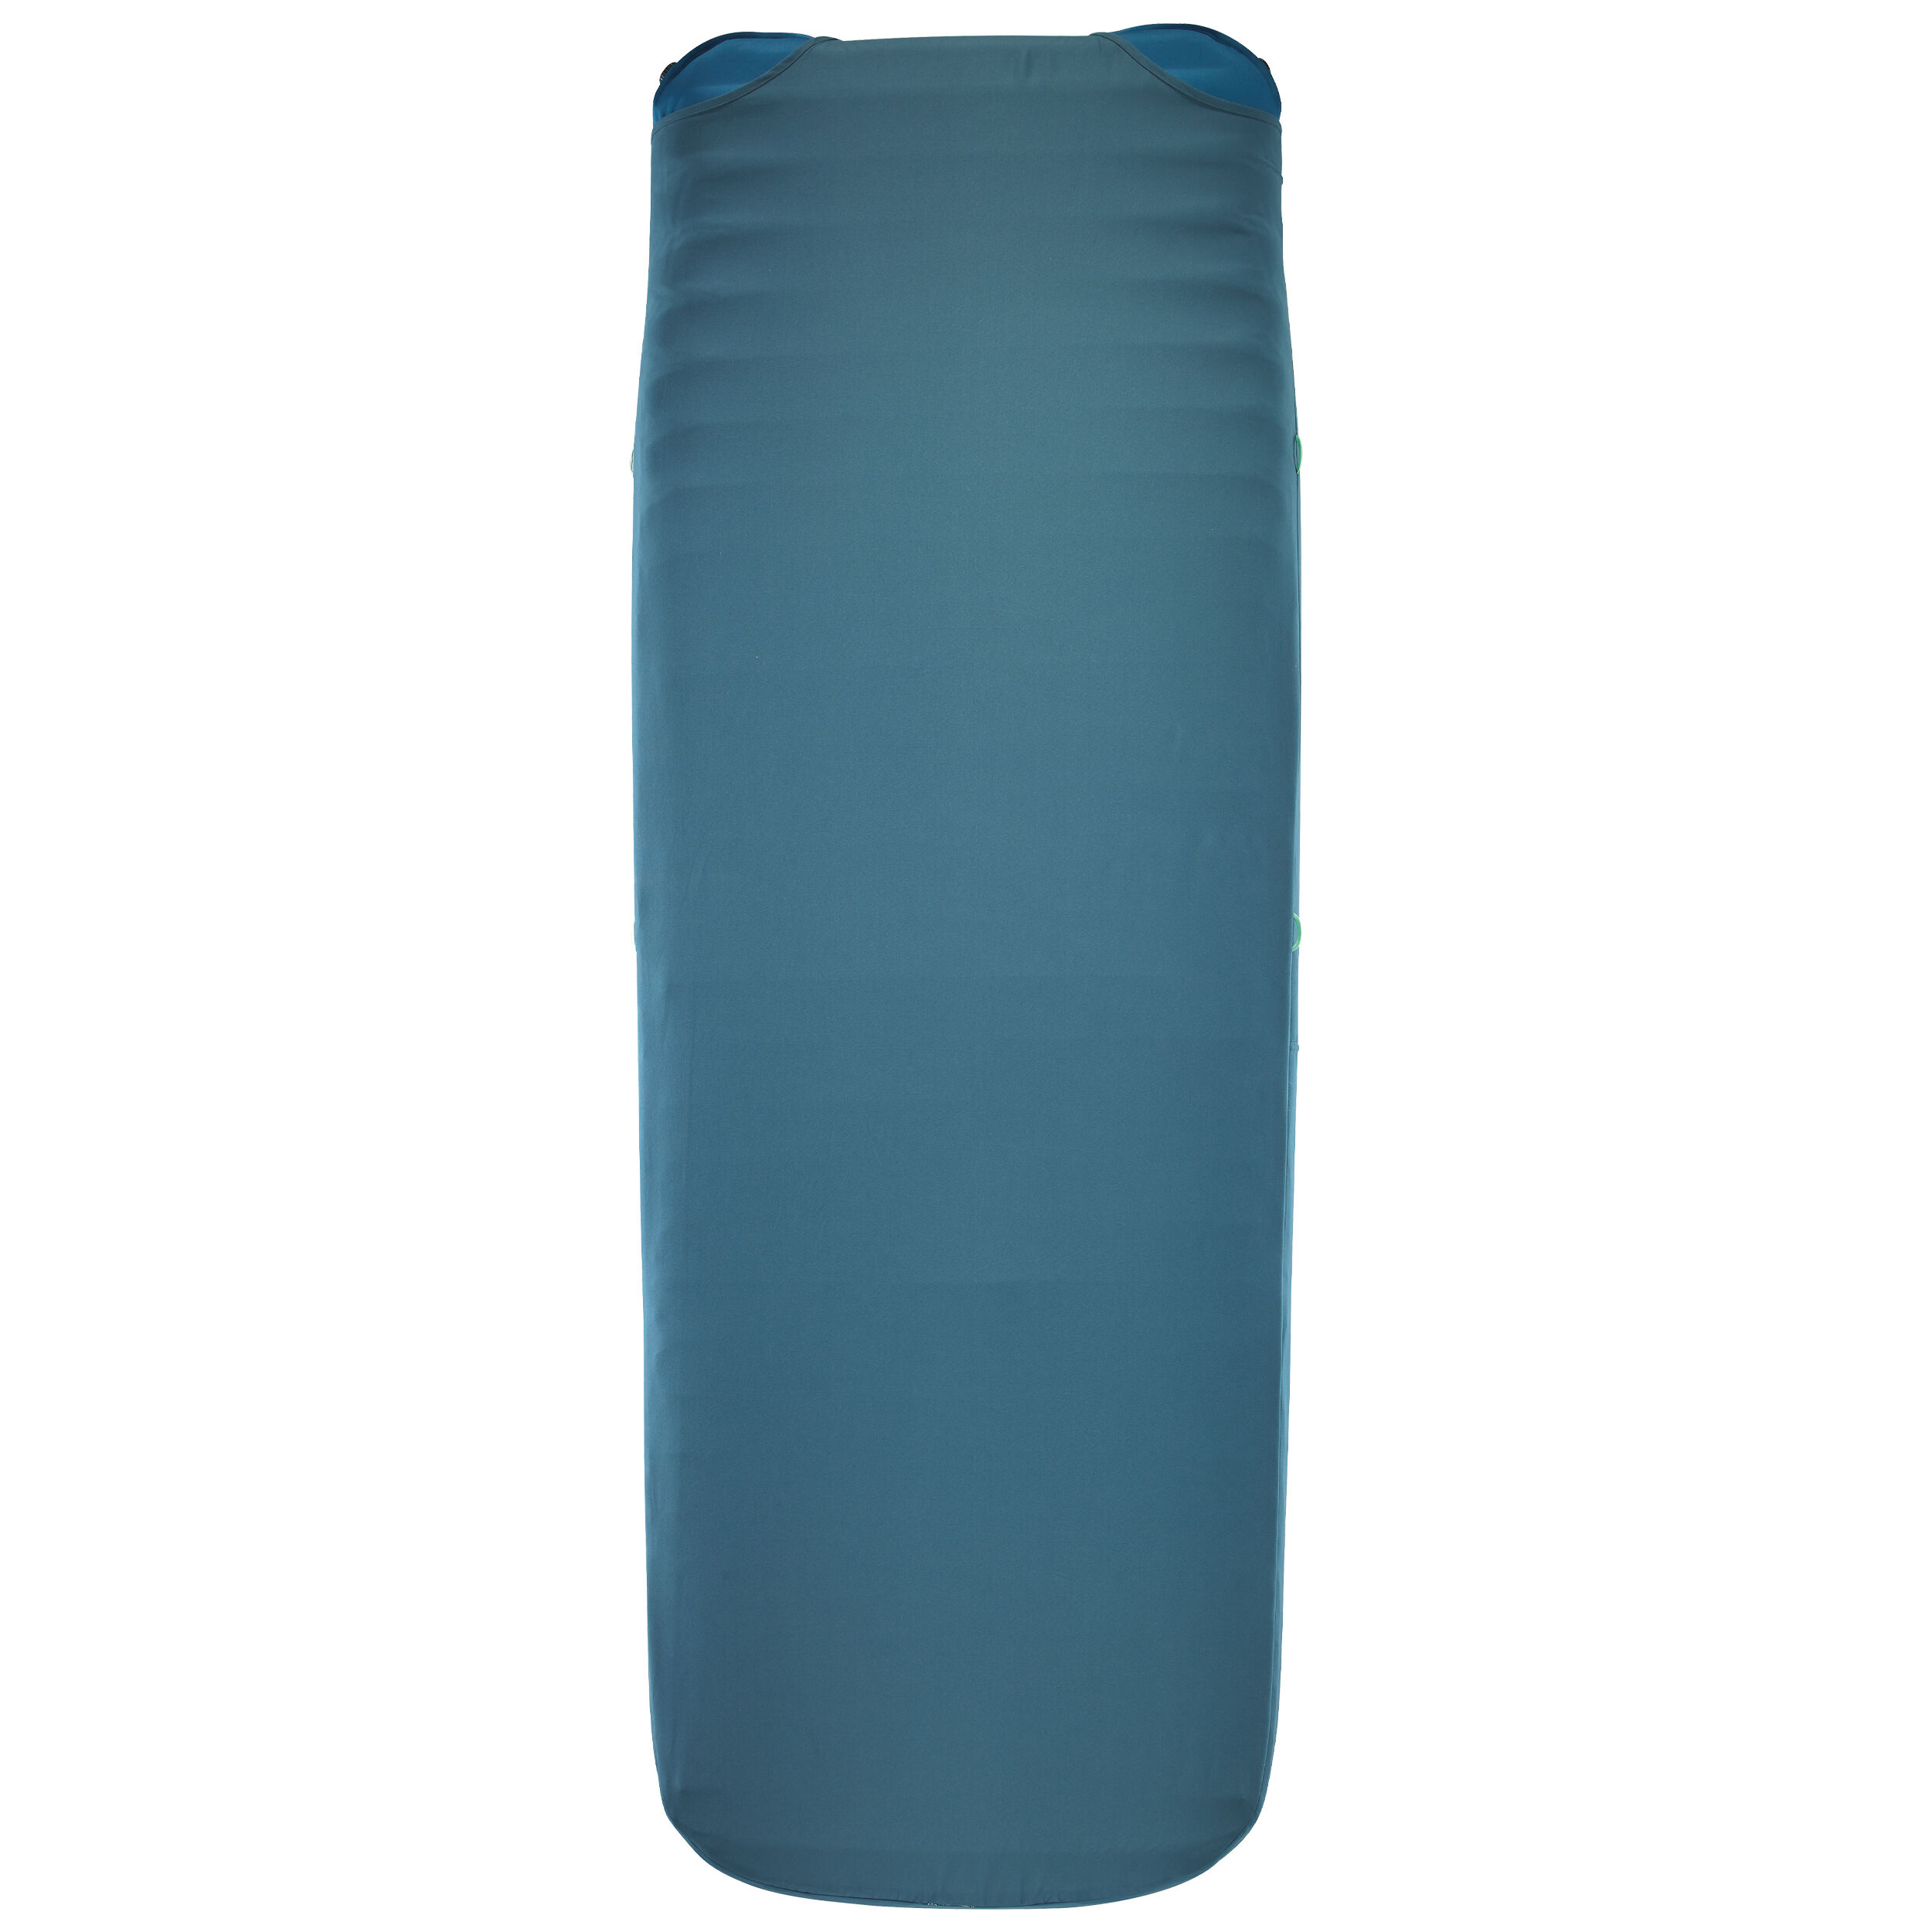 Thermarest Synergy Sheet for Adventure Gear Sommeil Mat-Gris Toutes Les Tailles 